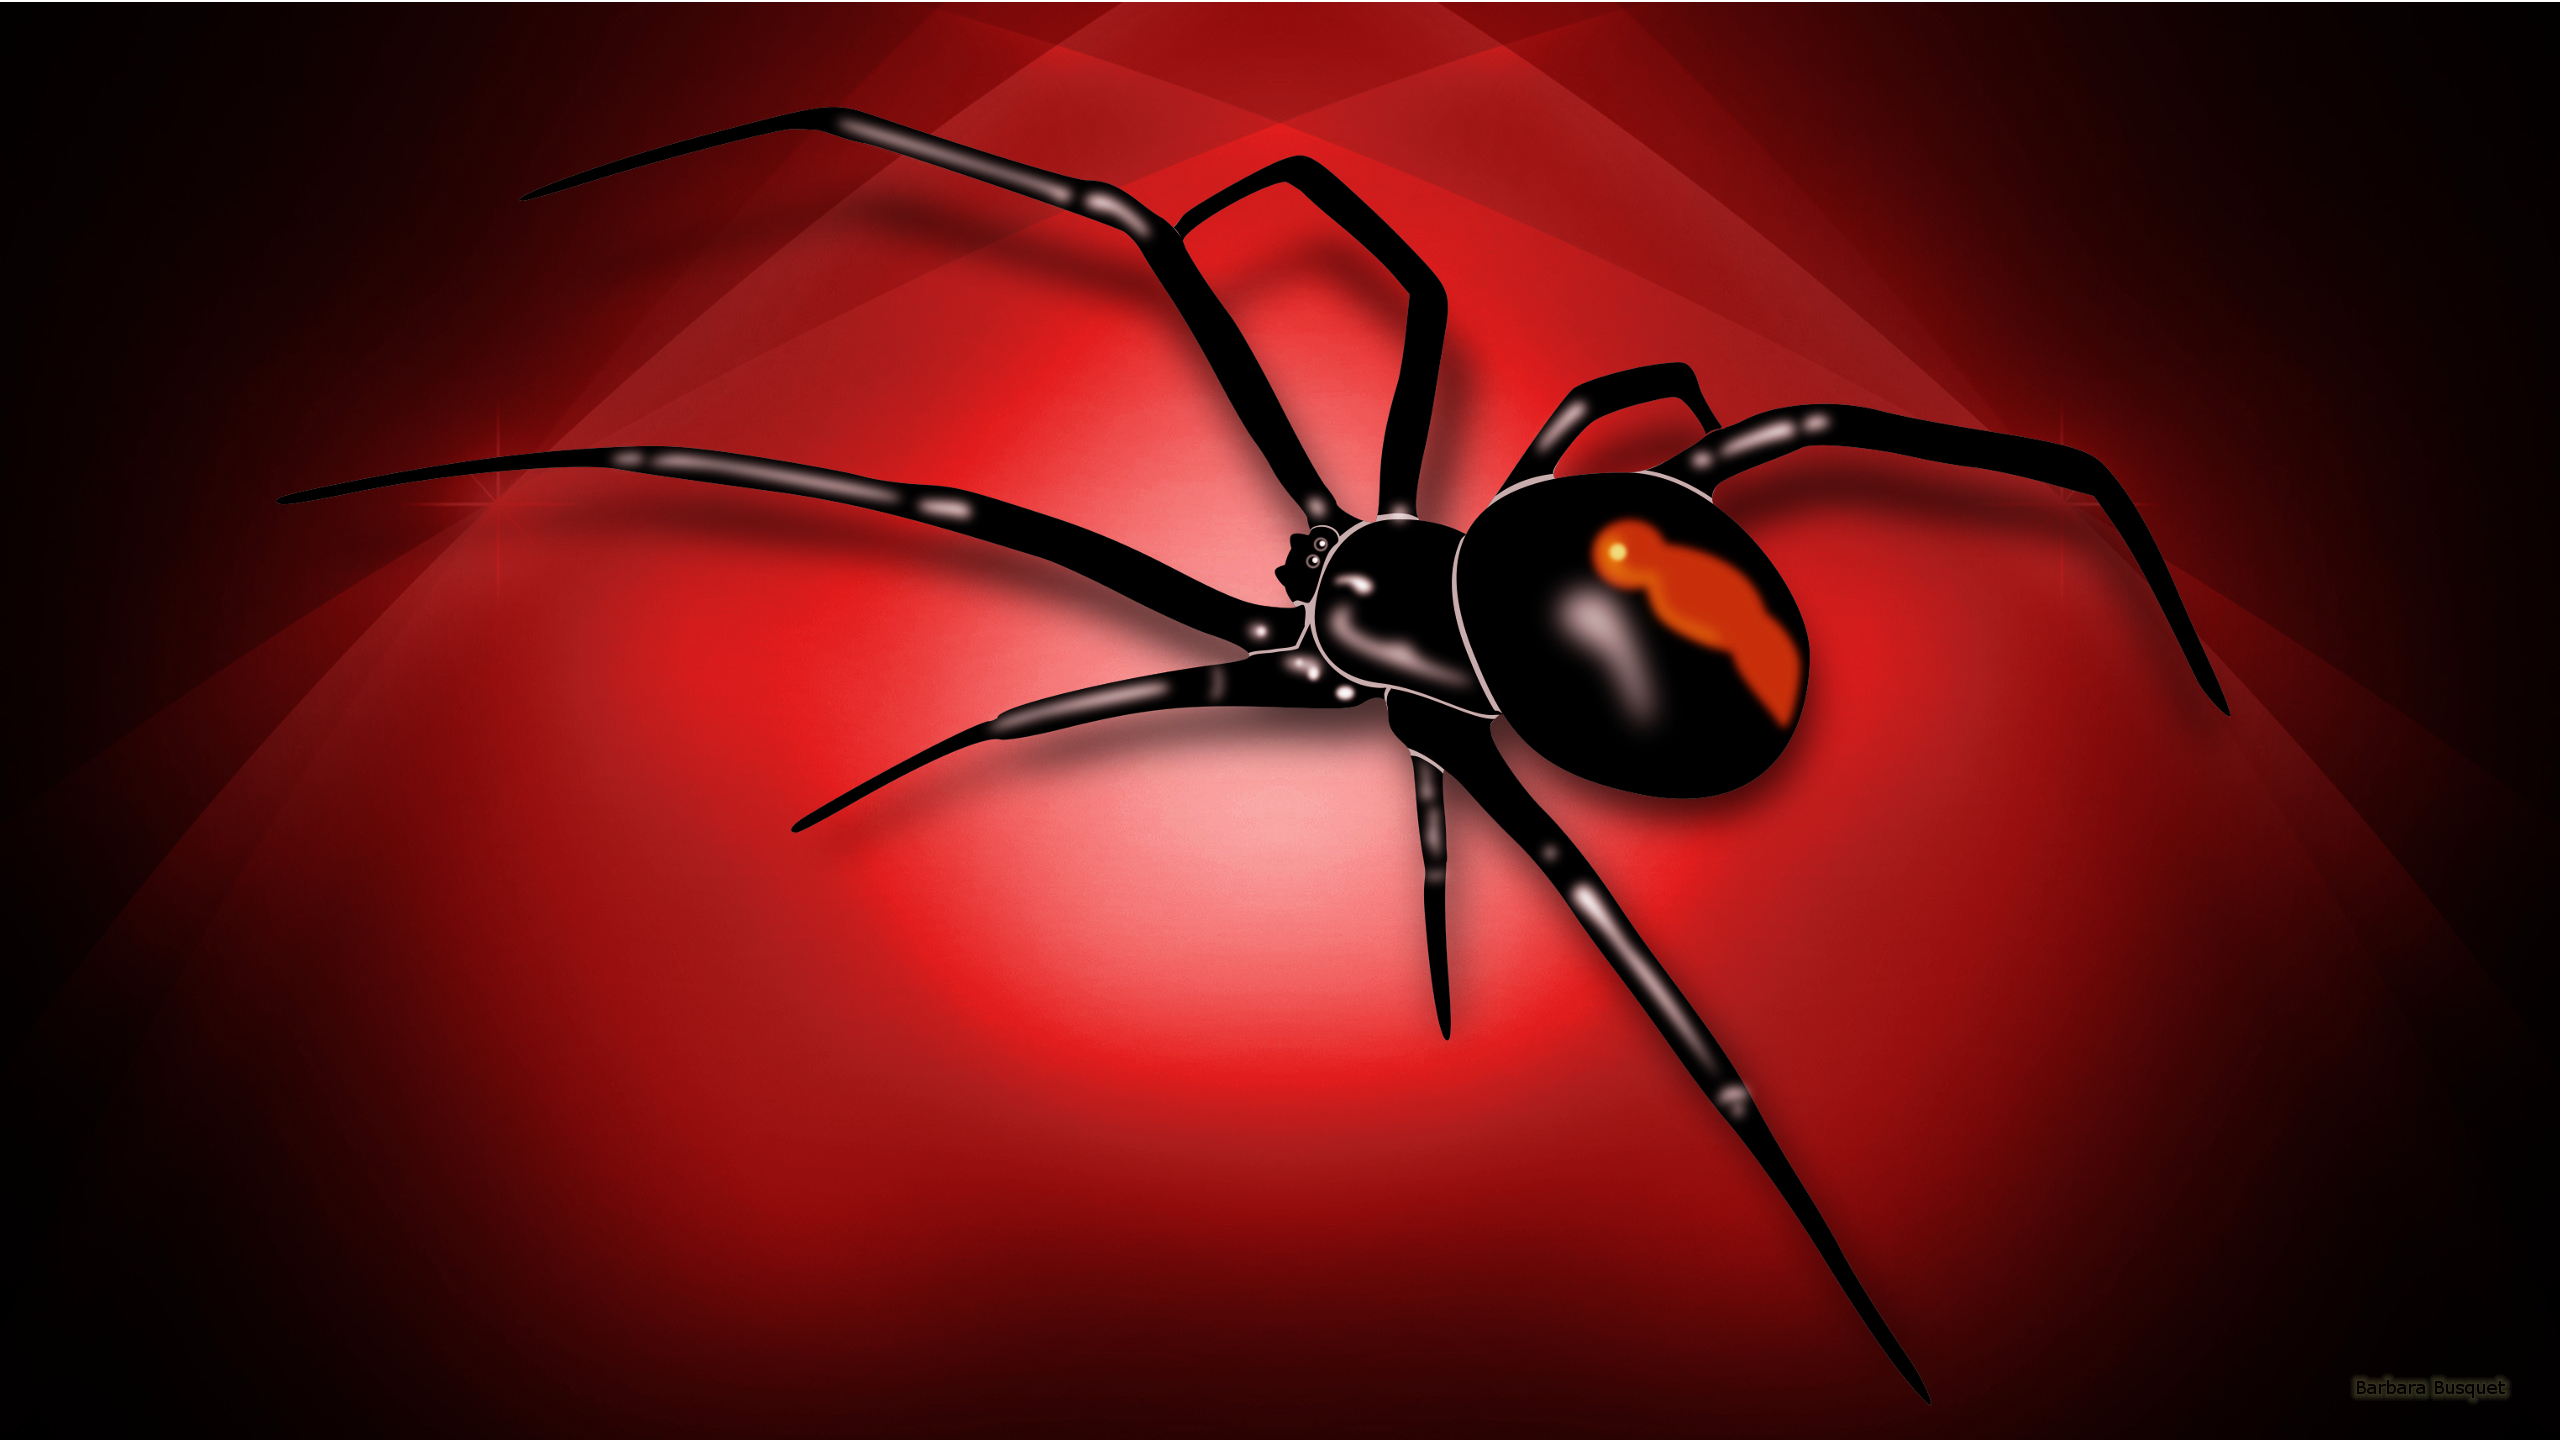 hd wallpaper with red white spider